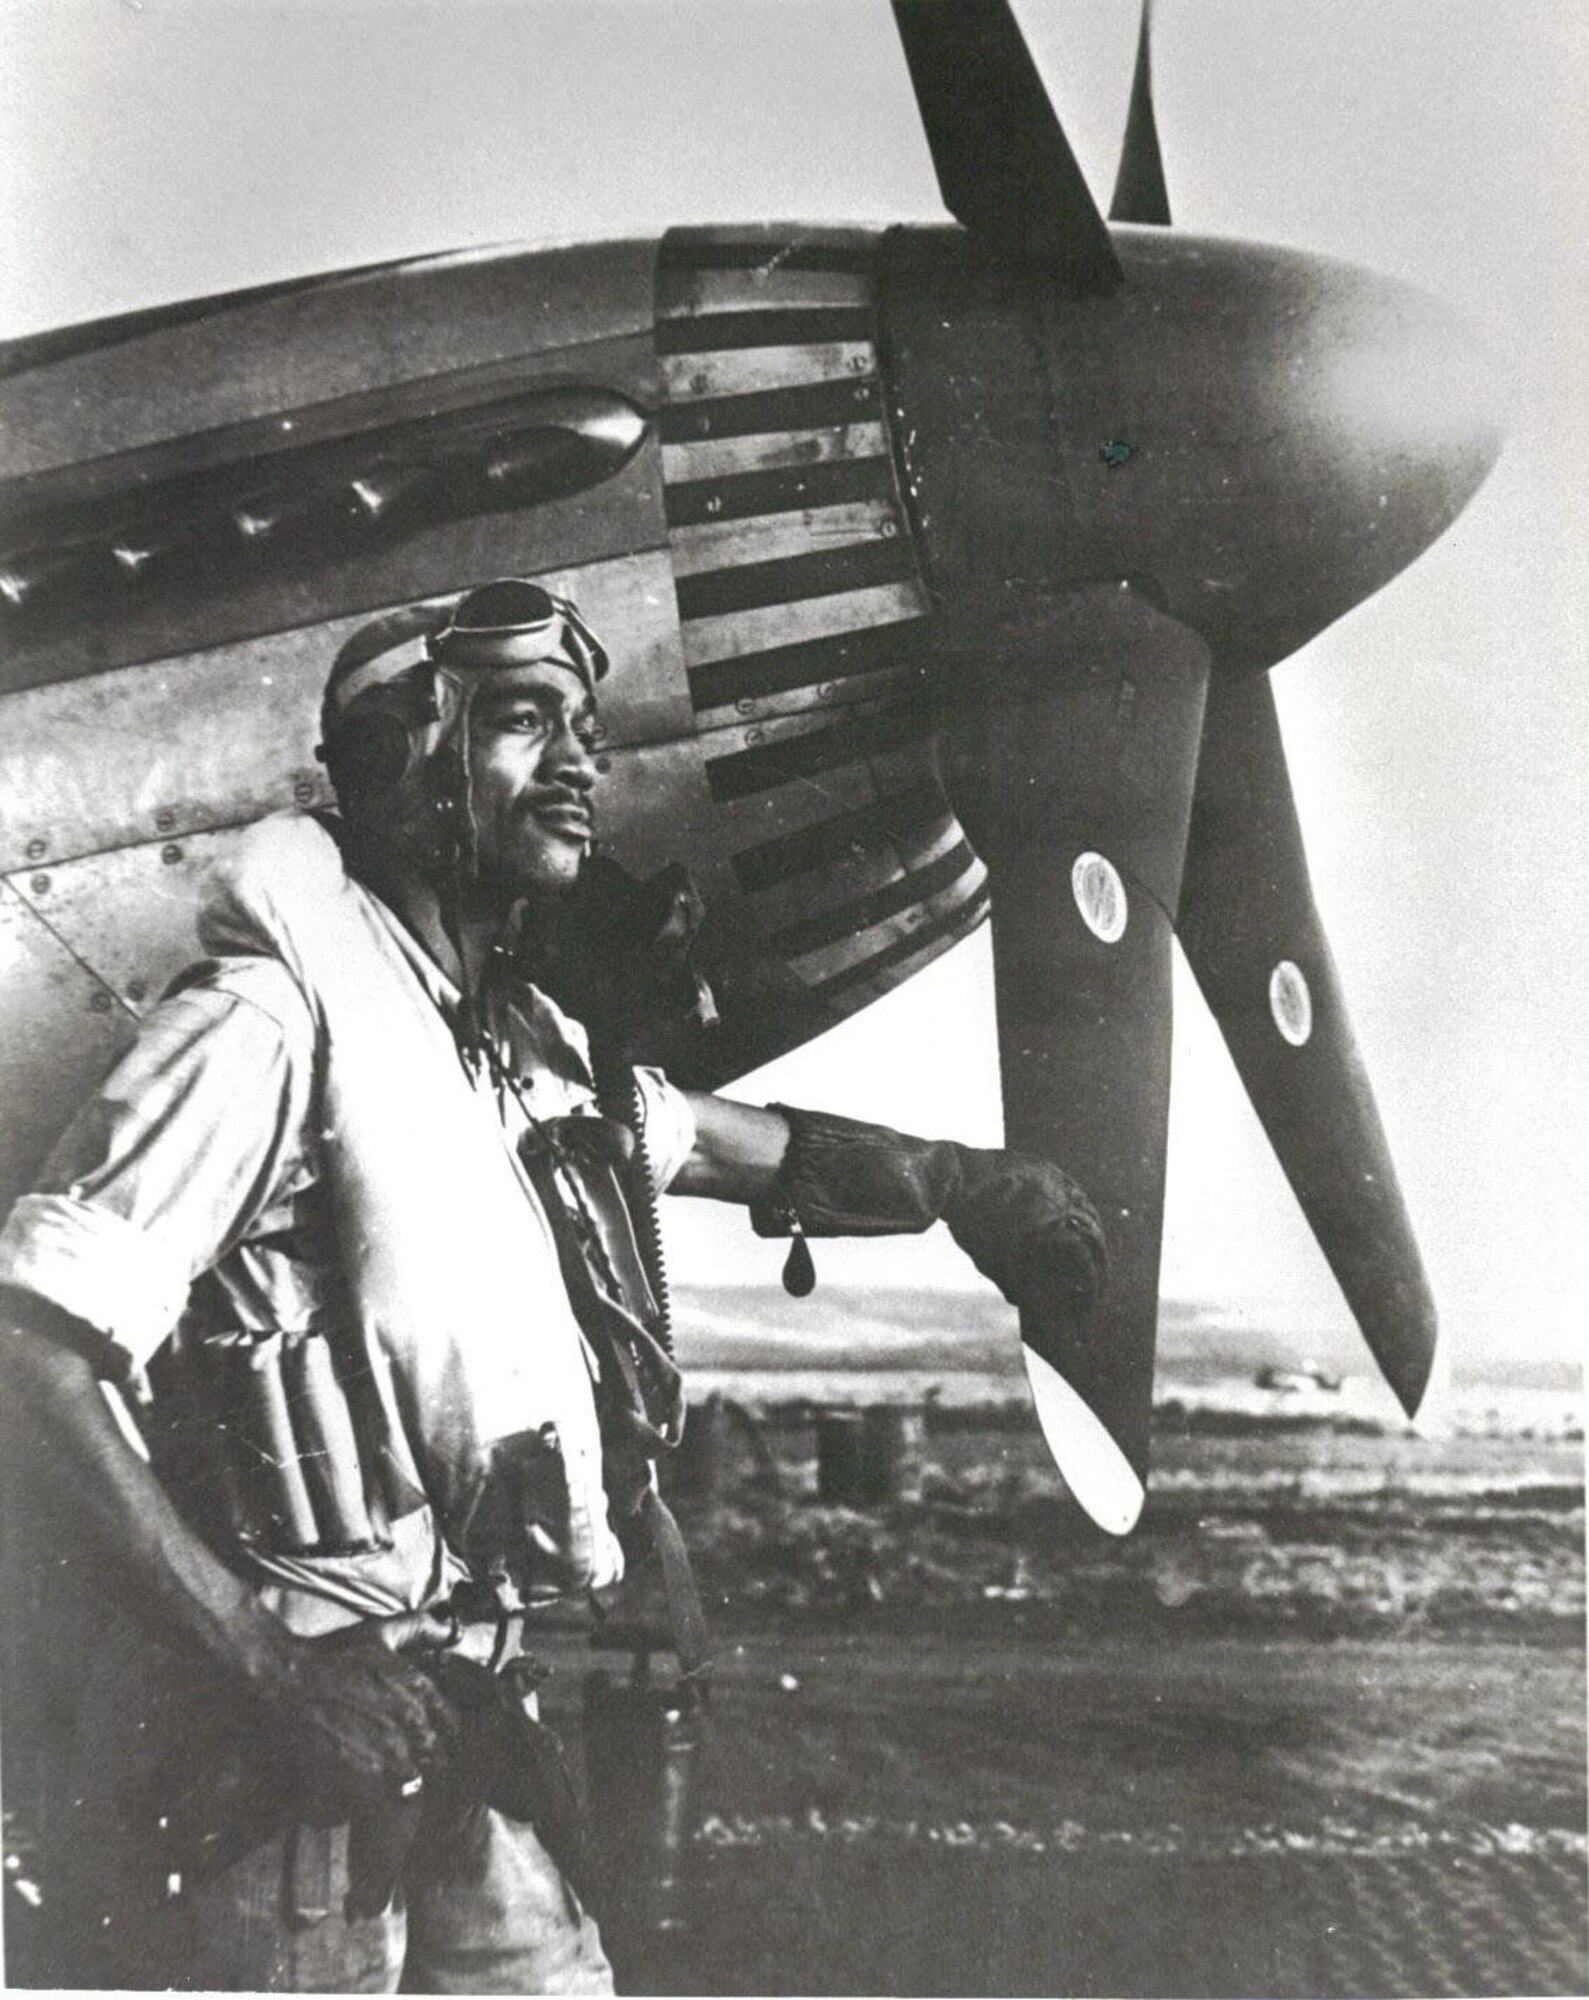 Lt.Col. Lee Archer: Tuskegee Airman. He and his unit were brought to life in the George Lucas film "Red Tails."